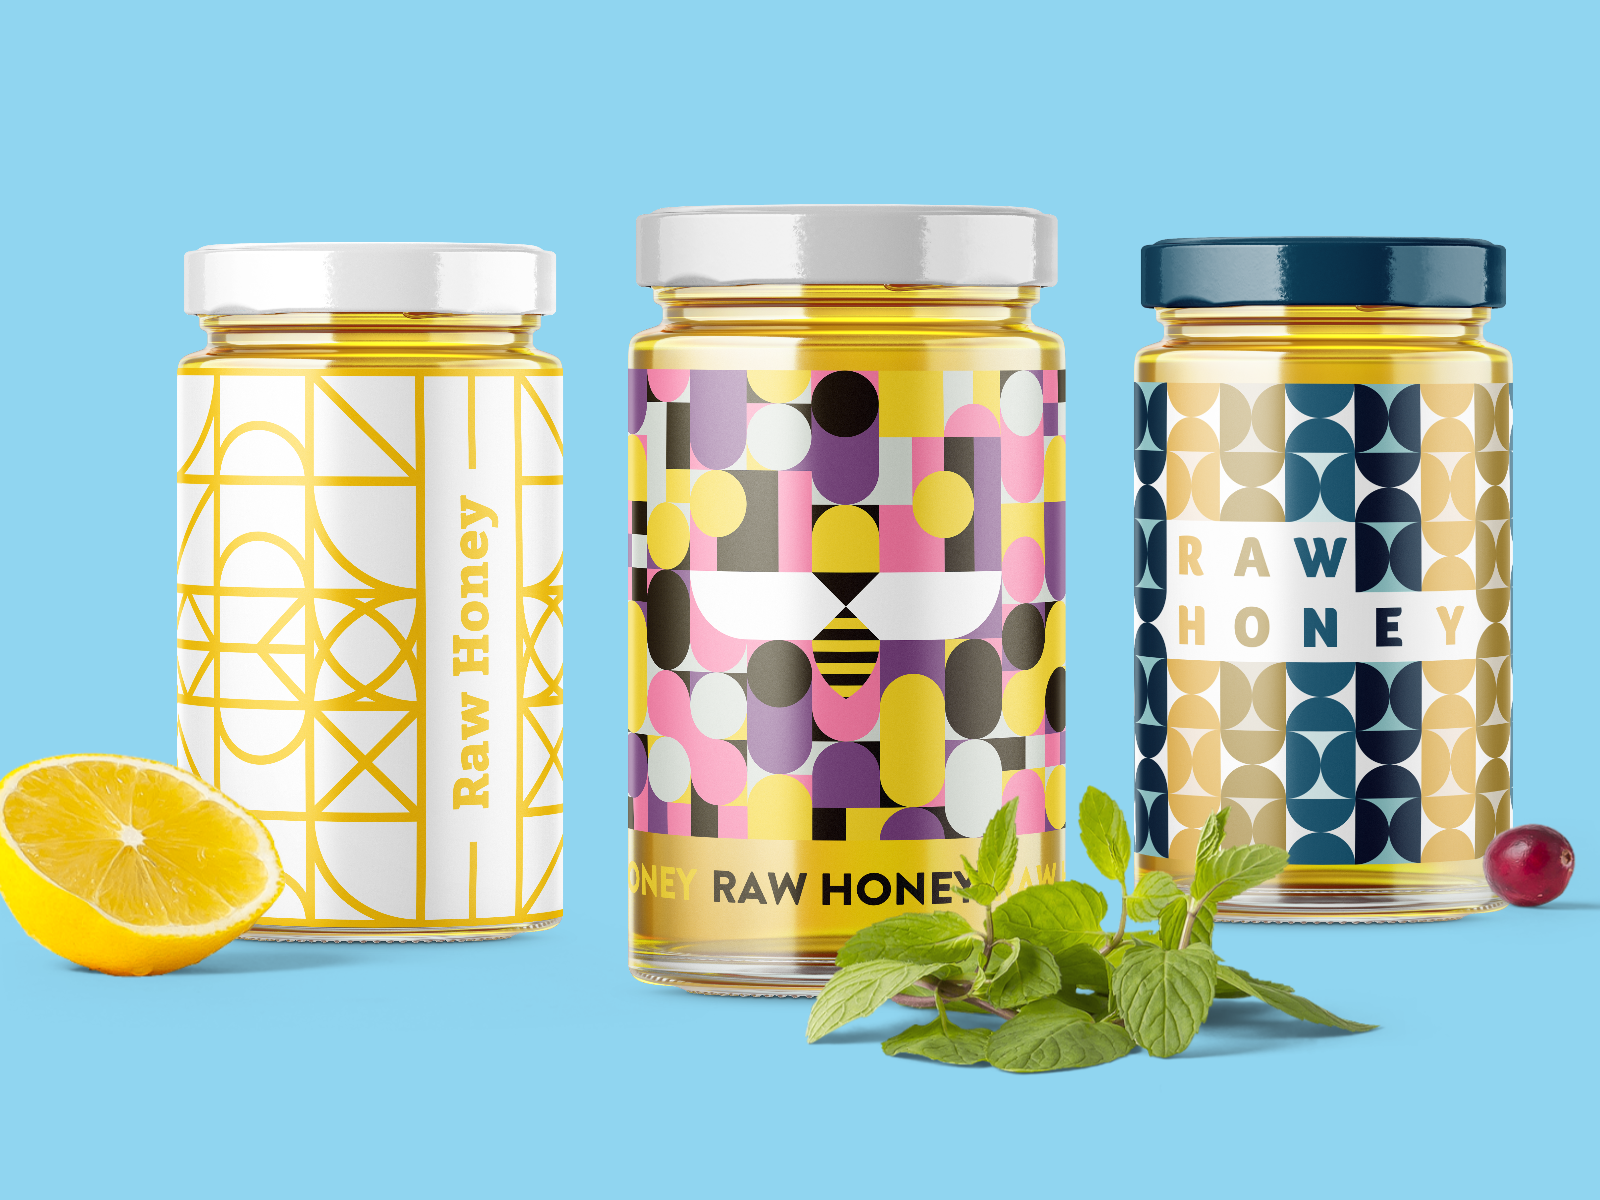 Download Honey Jars With Blocco Patterns By Mariana For Woohoo On Dribbble Yellowimages Mockups